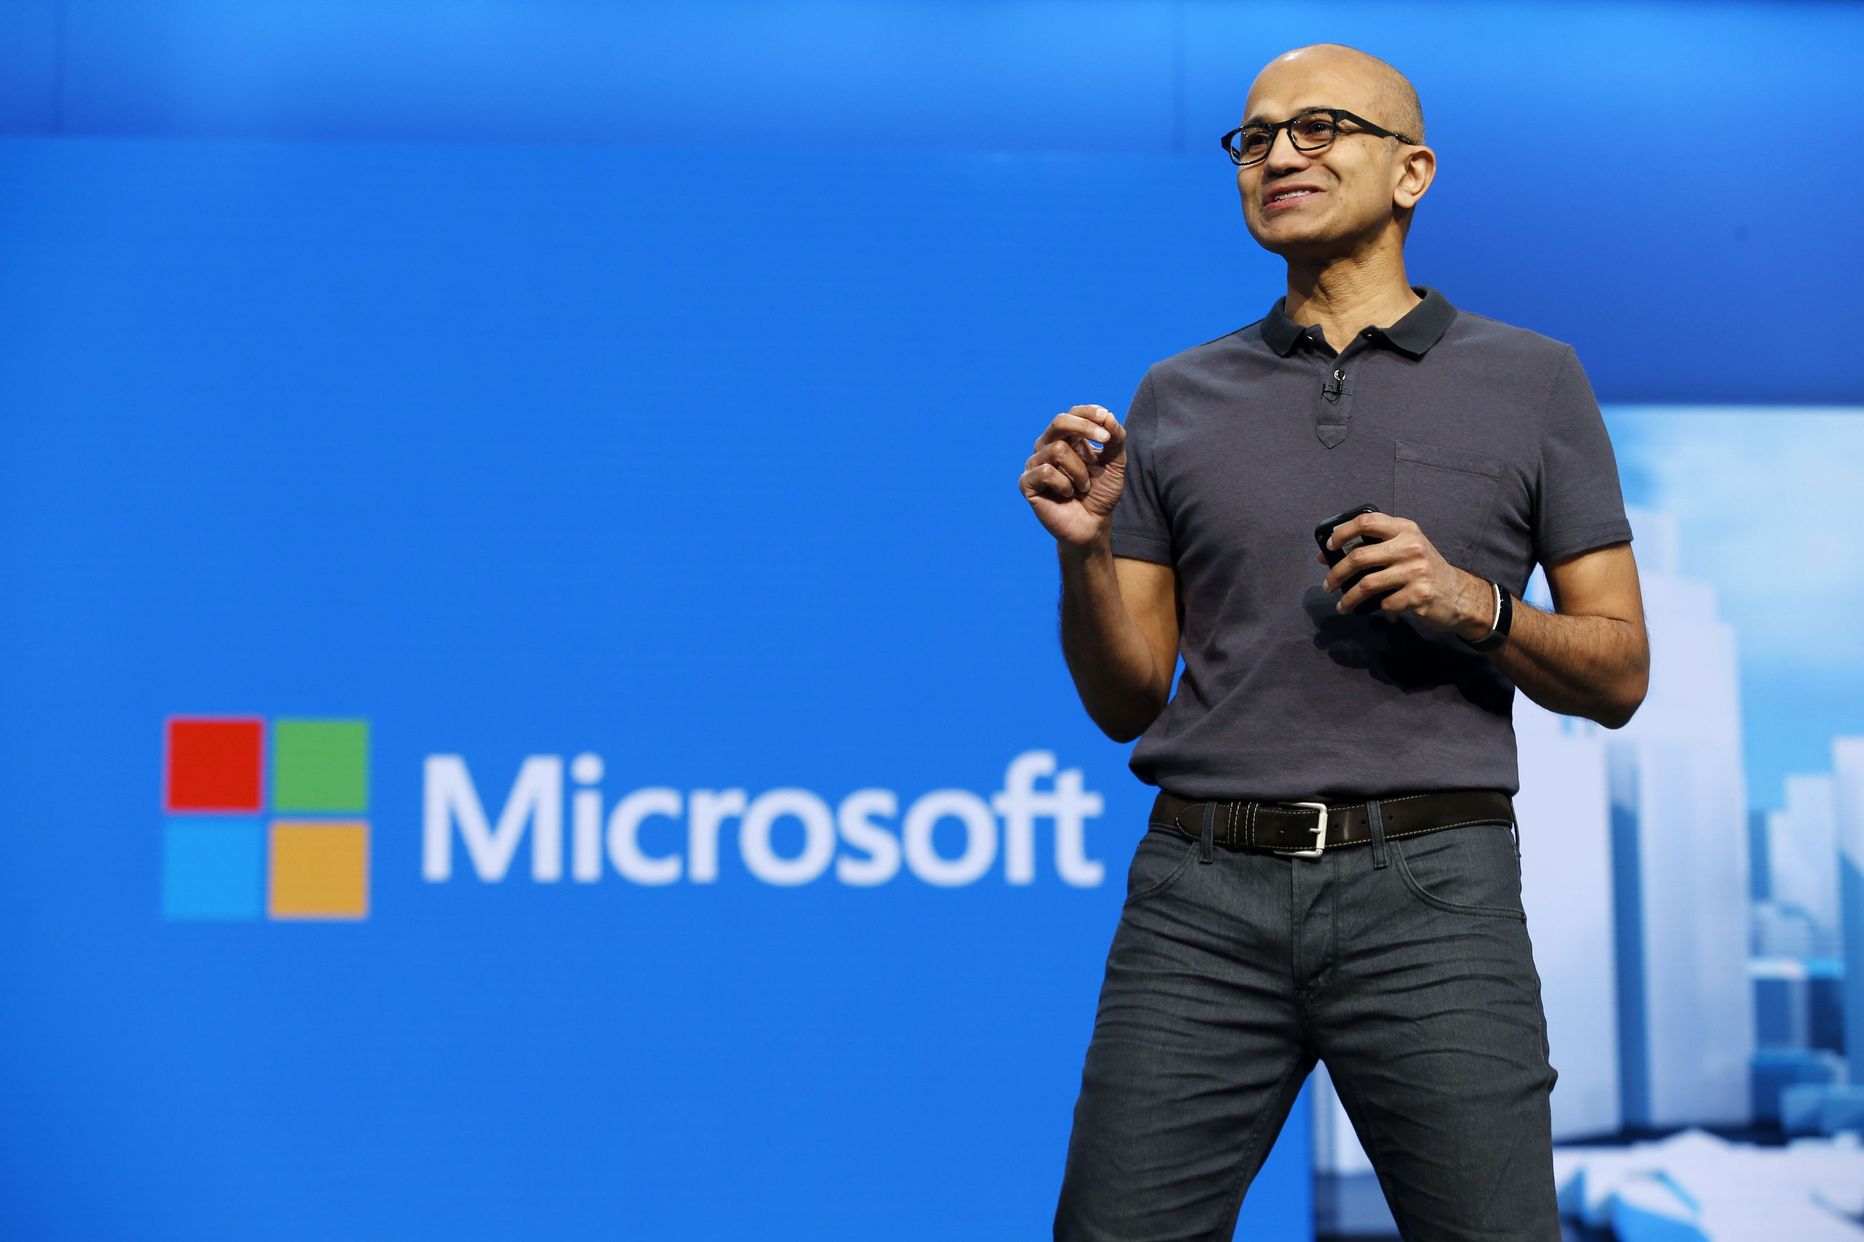 Microsoft CEO Satya Nadella delivers the keynote address during the Microsoft Build 2016 Developer Conference in San Francisco, California in this March 30, 2016, file photo. Microsoft Corp has sued the U.S. government for the right to tell its customers when a federal agency is looking at their emails, the latest in a series of clashes over privacy between the technology industry and Washington.  REUTERS/Beck Diefenbach/Files